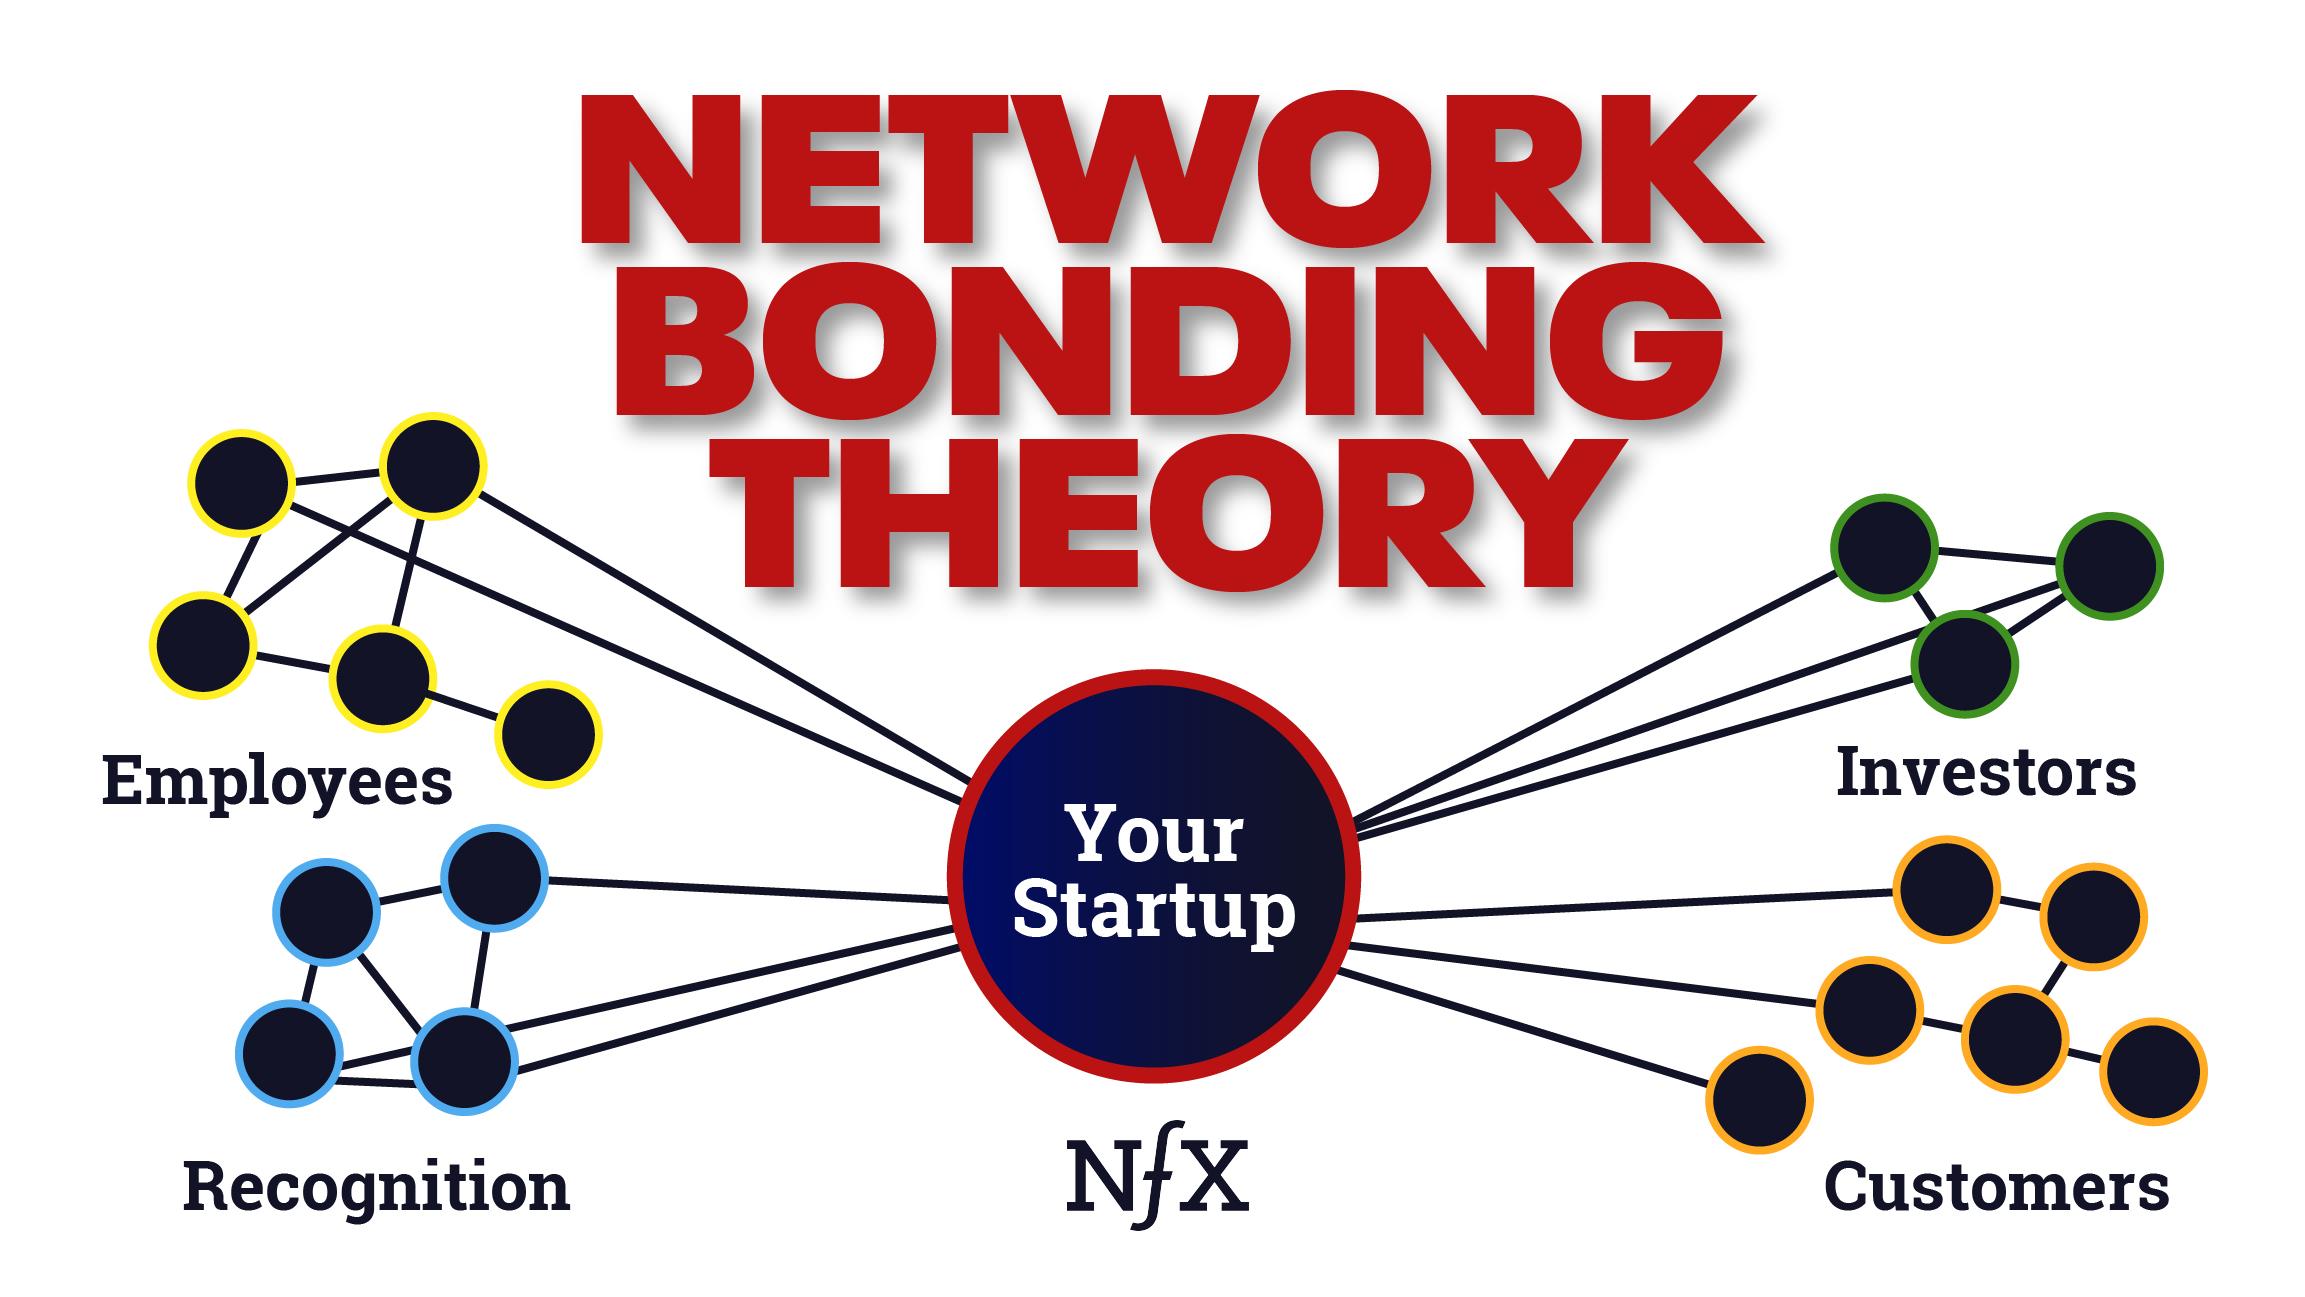 Network Bonding Theory: Understanding Your Startup & The Web3 Ownership Economy